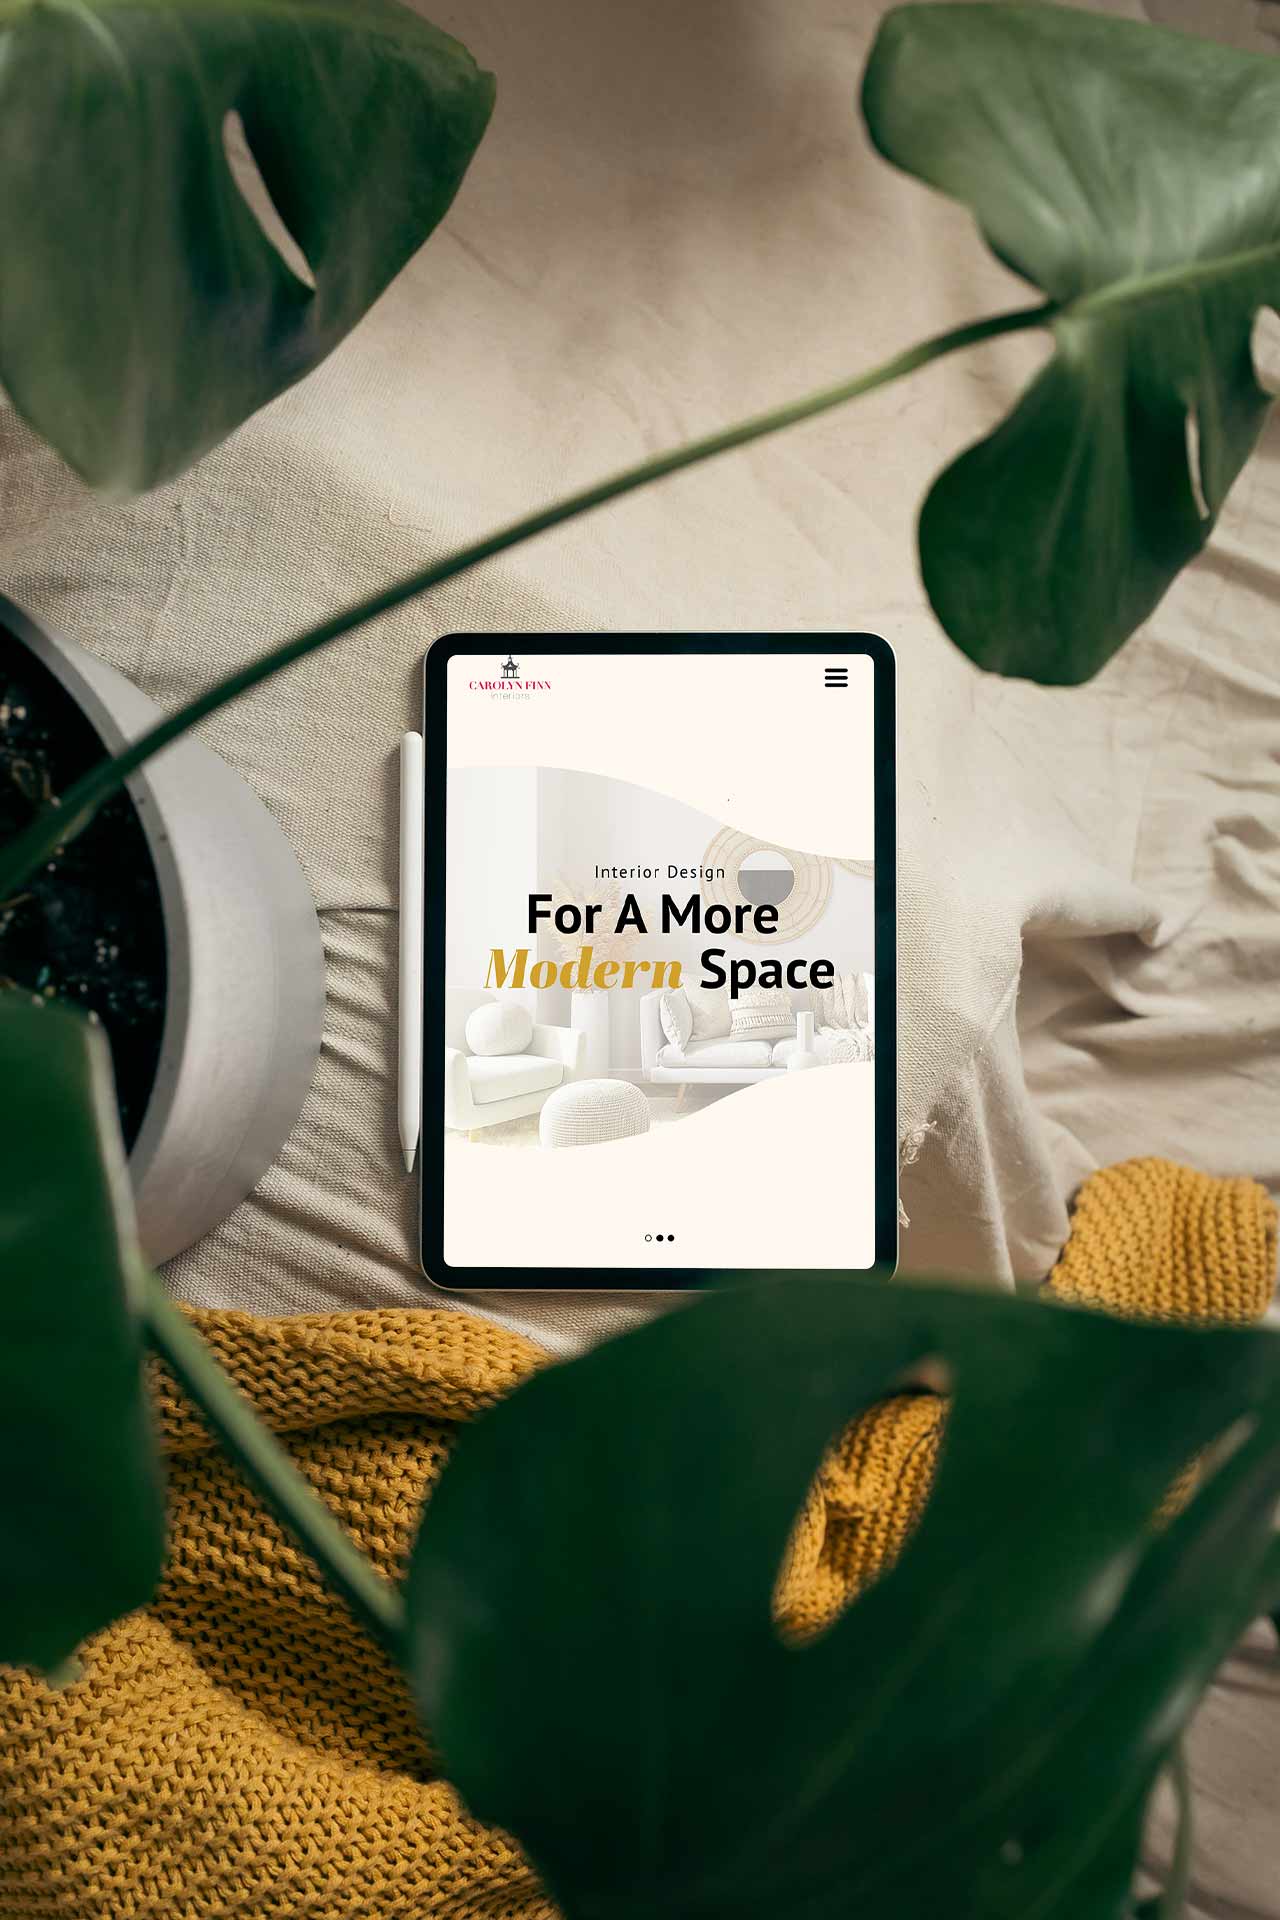 A home page UI for tablet display on a sofa by a plant.